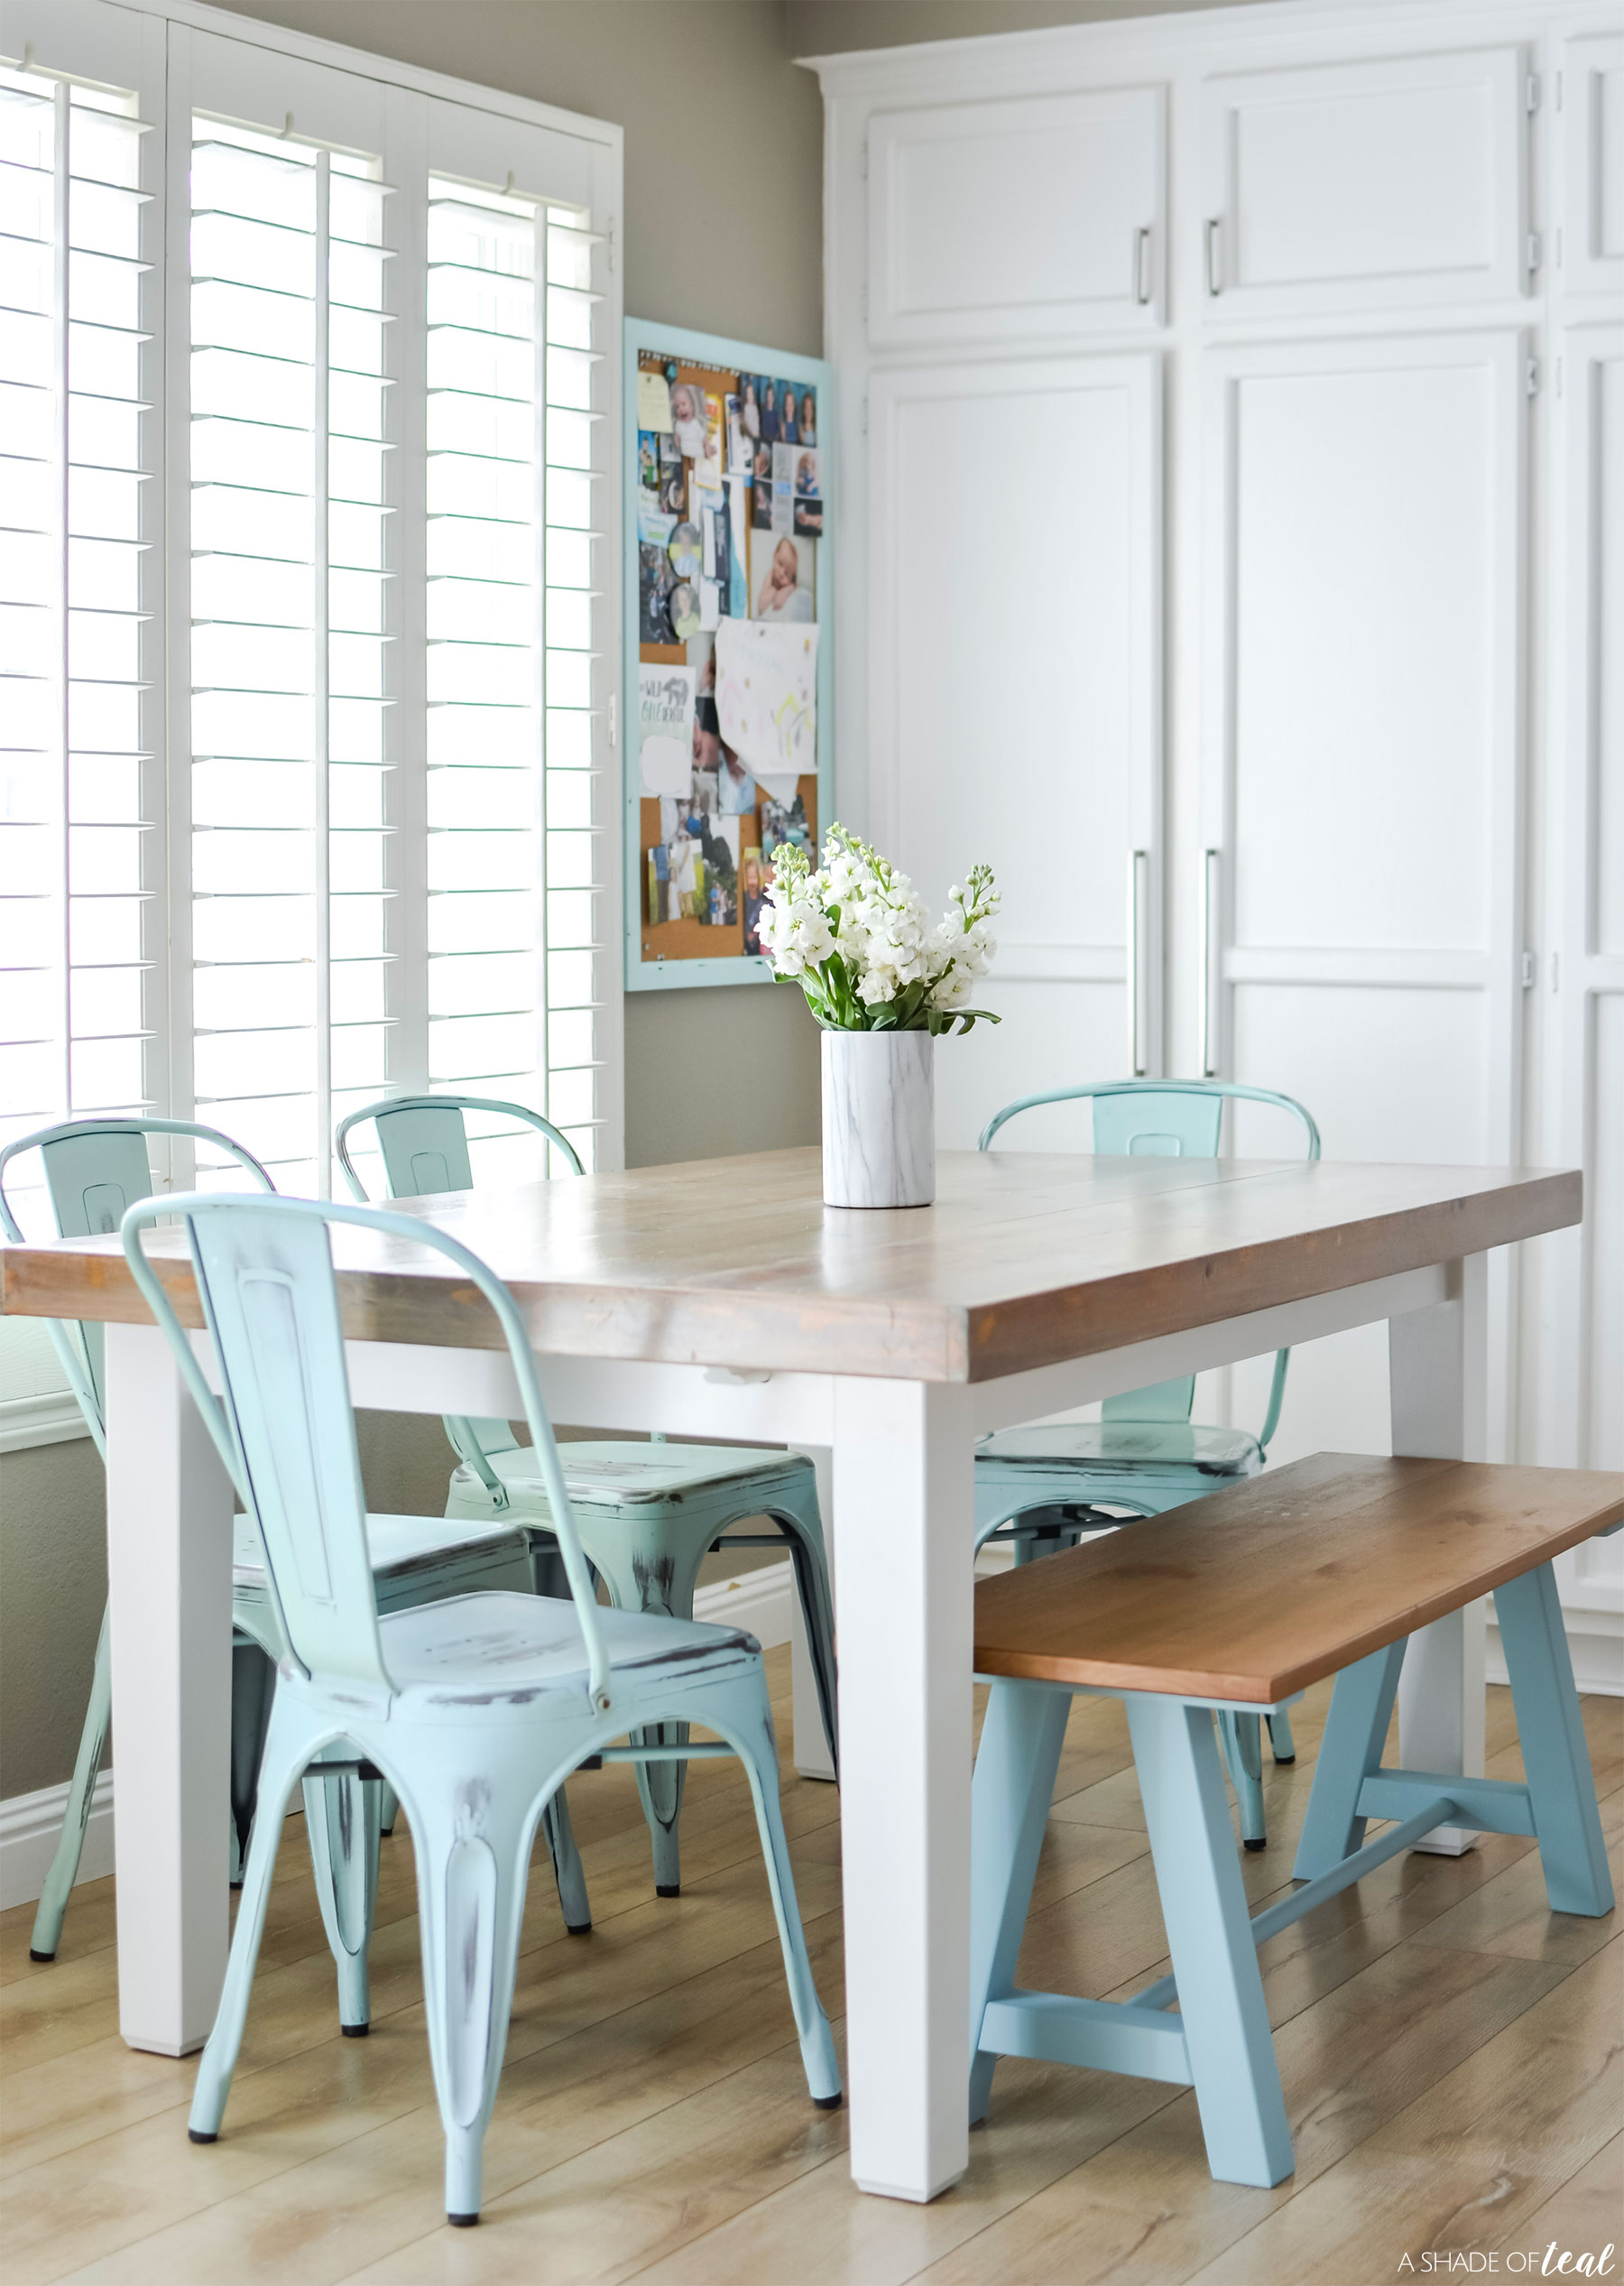 Wooden dining room table with light teal chairs